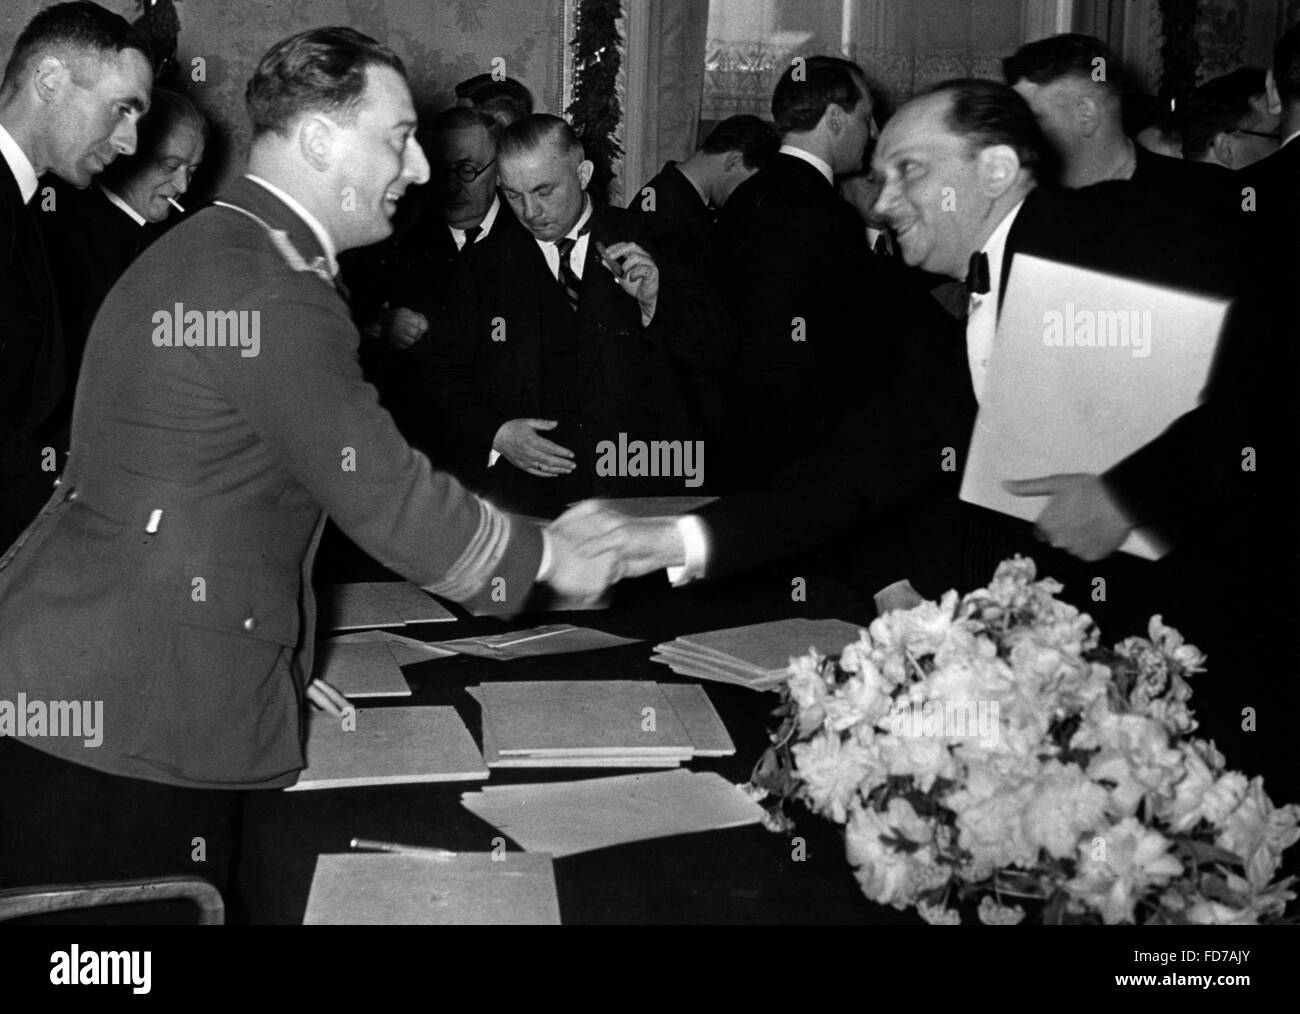 Franz Moraller and Theodor Loos: Reich Culture Senate Meeting at the Hotel Kaiserhof, 1936 Stock Photo